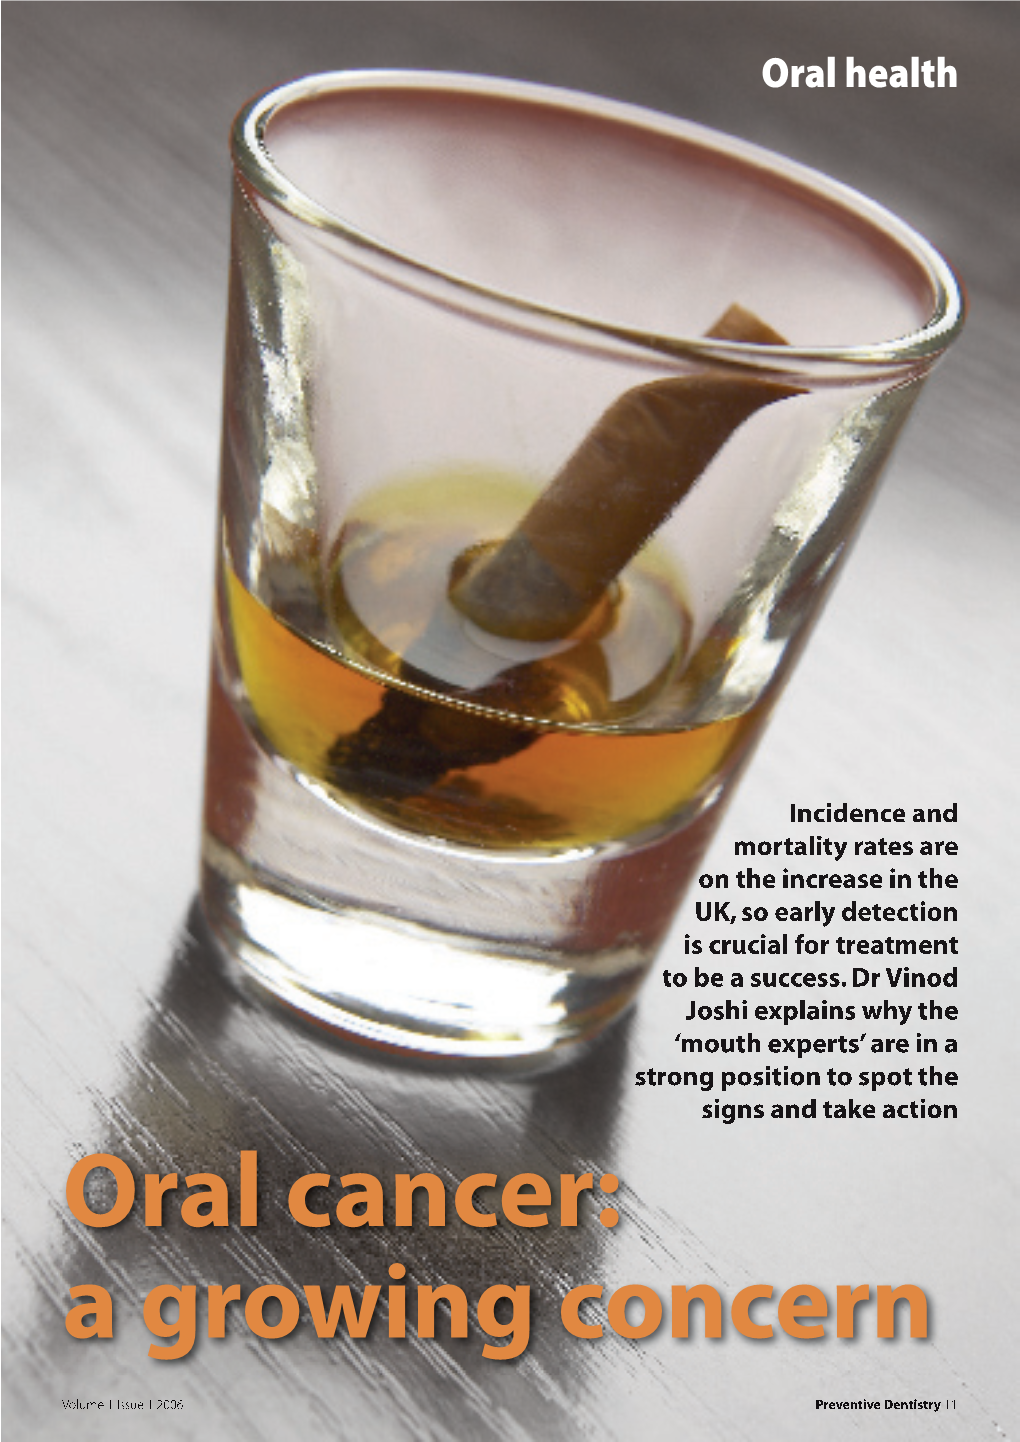 Oral Cancer in the UK During 2000 Was 1,334 Males and 717 Females